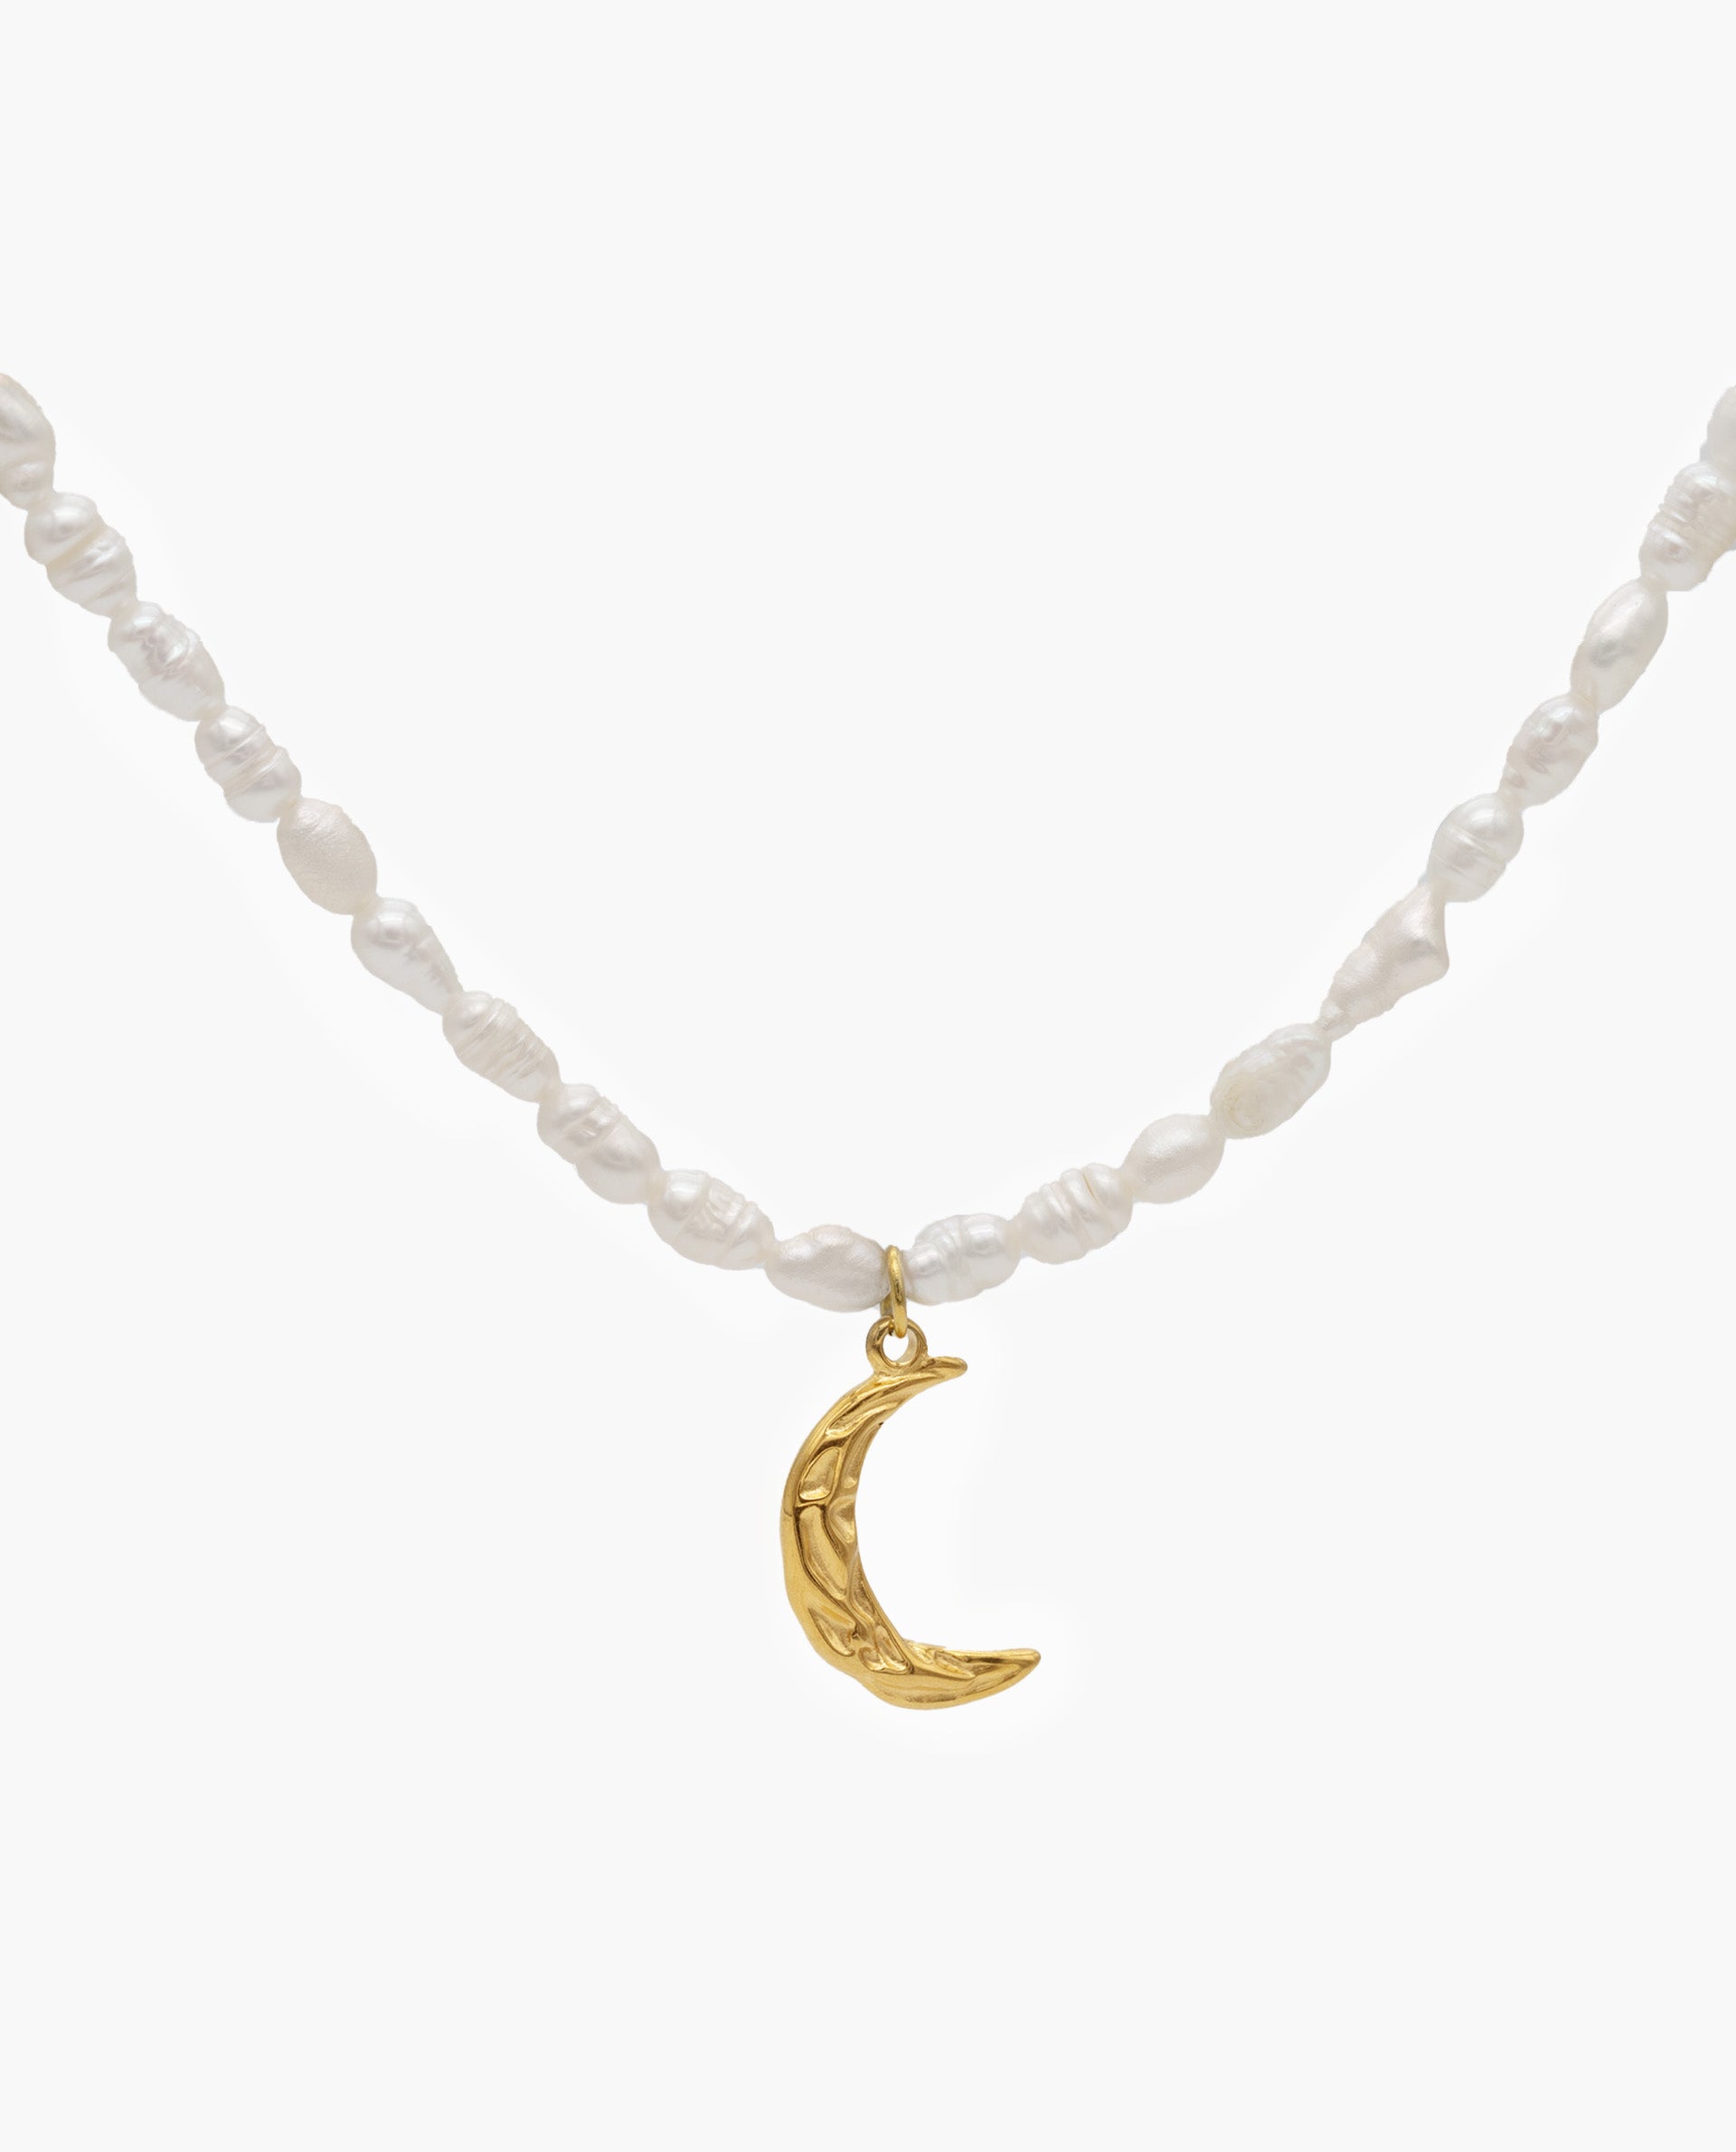 PEARL MOON NECKLACE - GOLD PLATED STEEL